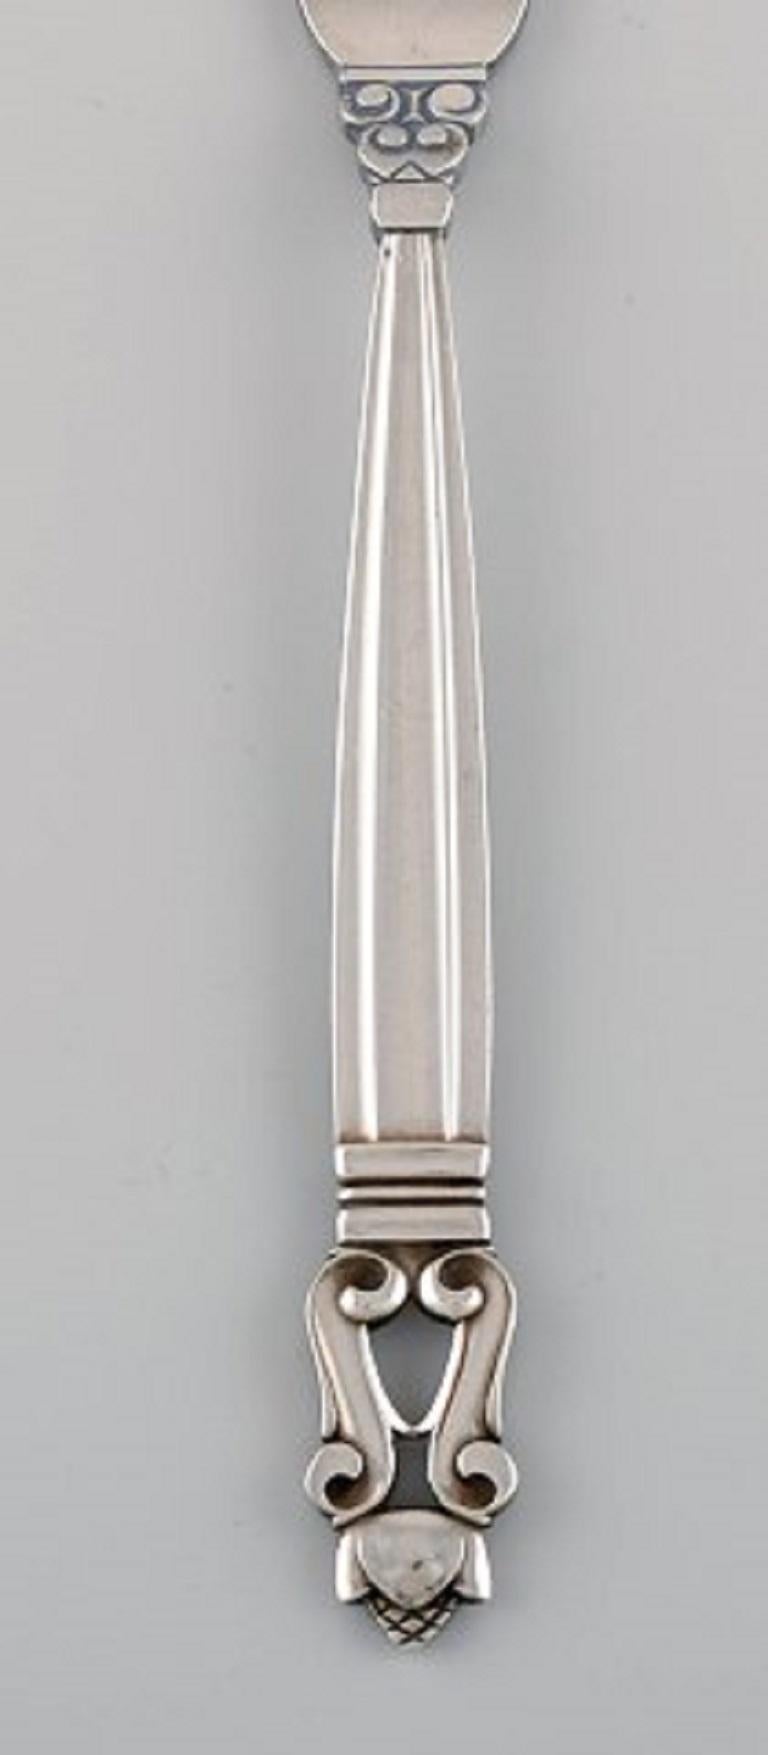 Georg Jensen Acorn roast fork in sterling silver.
Measure: Length 20 cm.
Stamped.
In excellent condition.
Our skilled Georg Jensen silversmith / jeweler can polish all silver and gold so that it appears as new. The price is very reasonable.